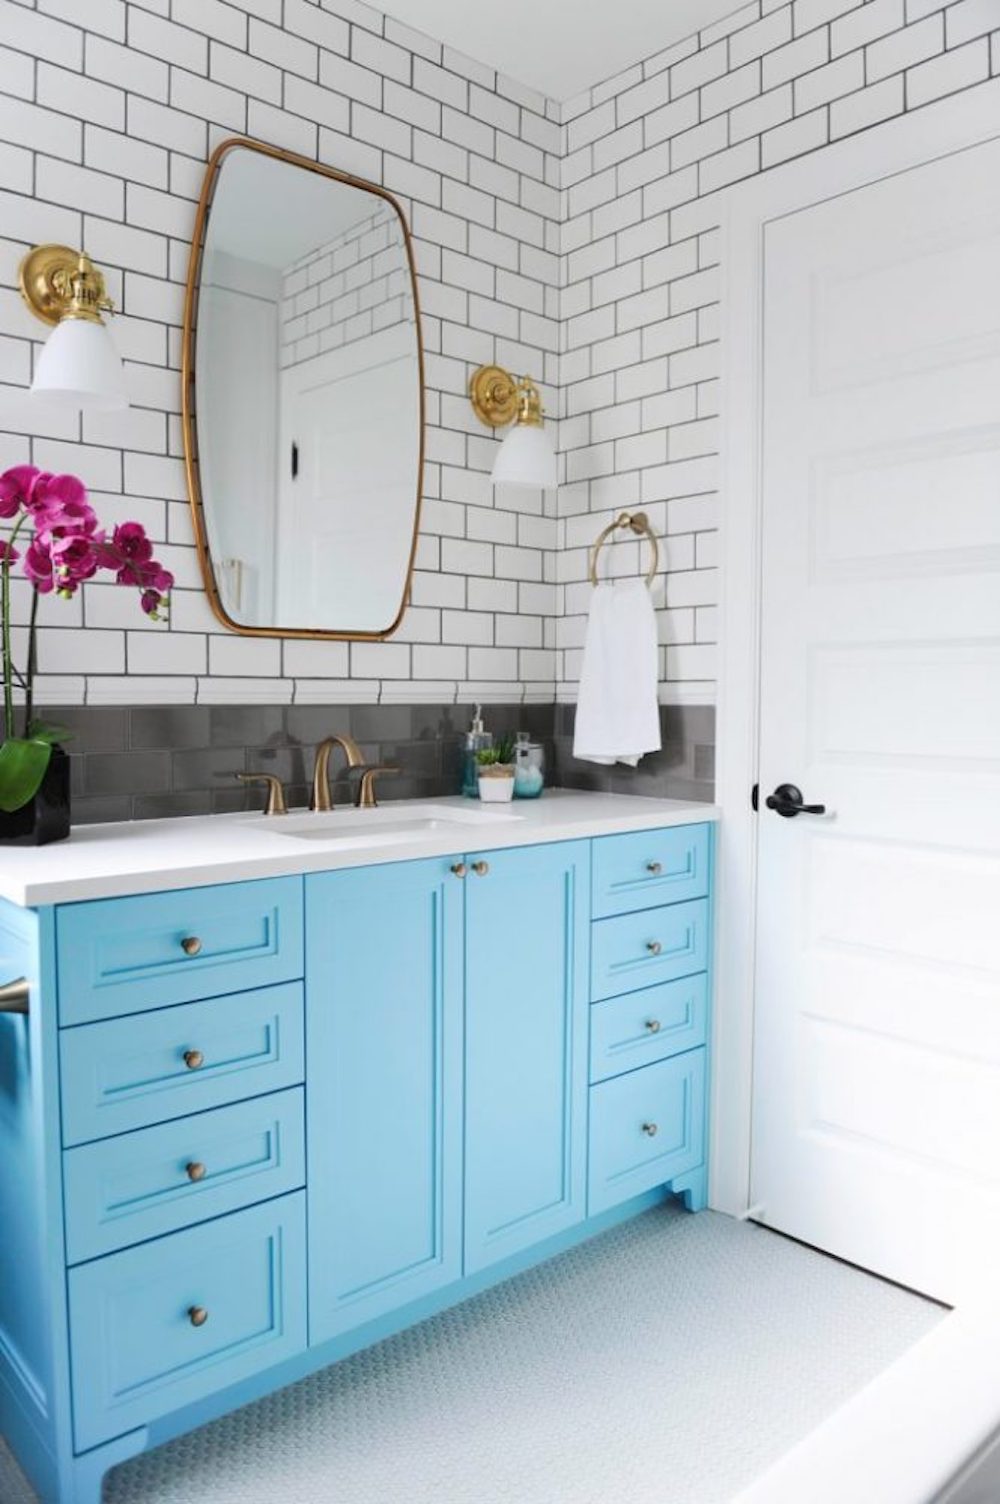 Fun and modern bathroom with white subway tiles on the wall, two brass scones, and a brass framed mirror hanging on the wall above an eggshell blue bathroom vanity